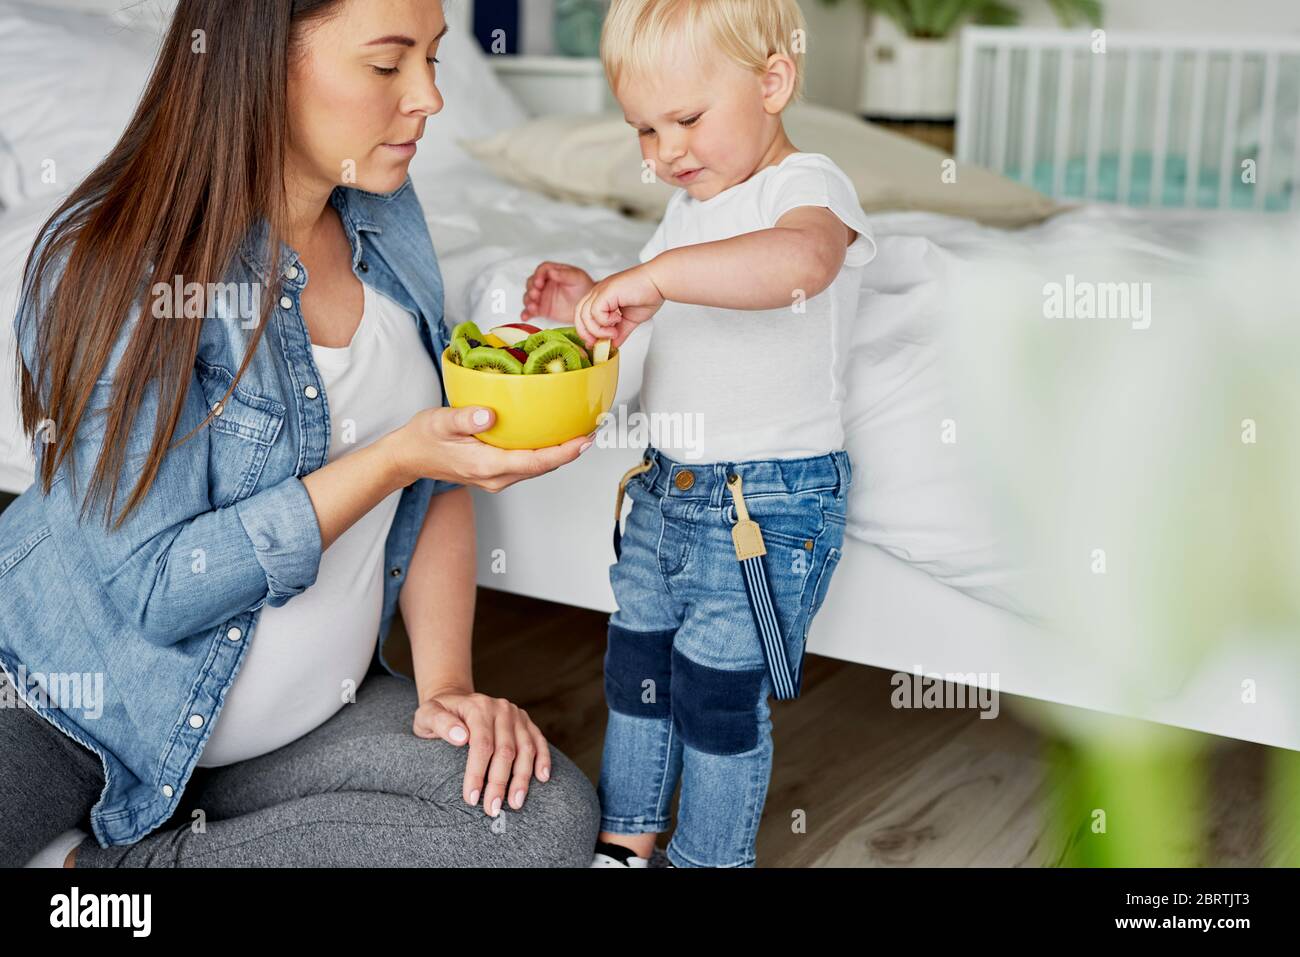 Toddler picking up fruit from the bowl Stock Photo